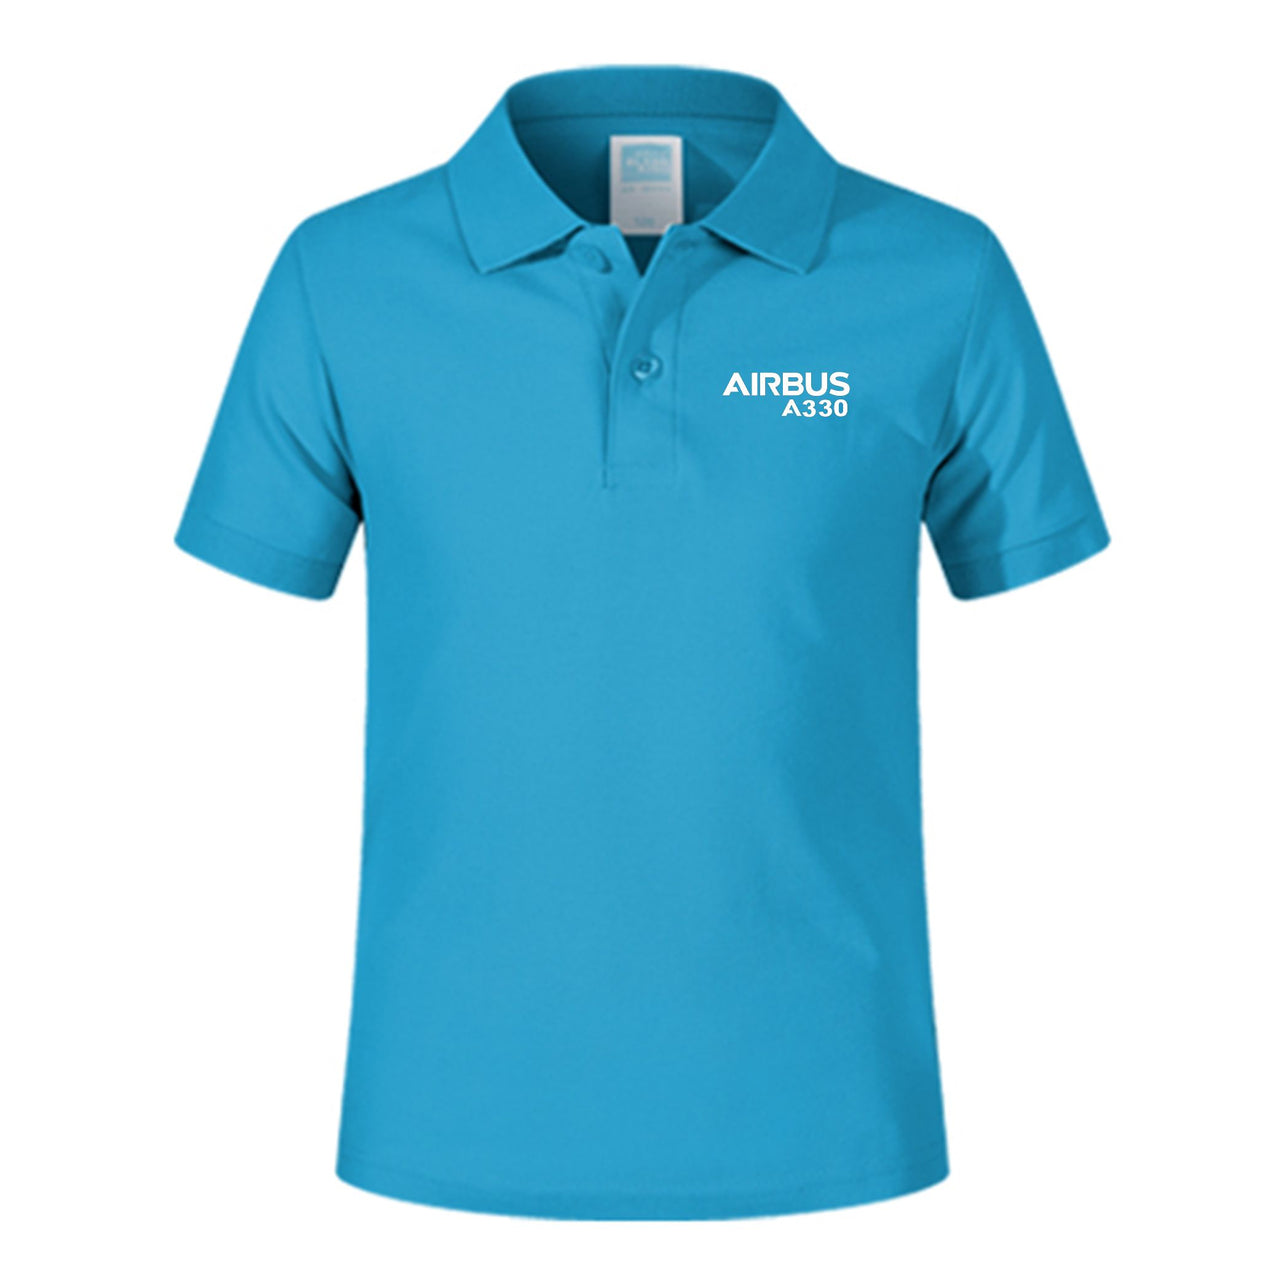 Airbus A330 & Text Designed Children Polo T-Shirts